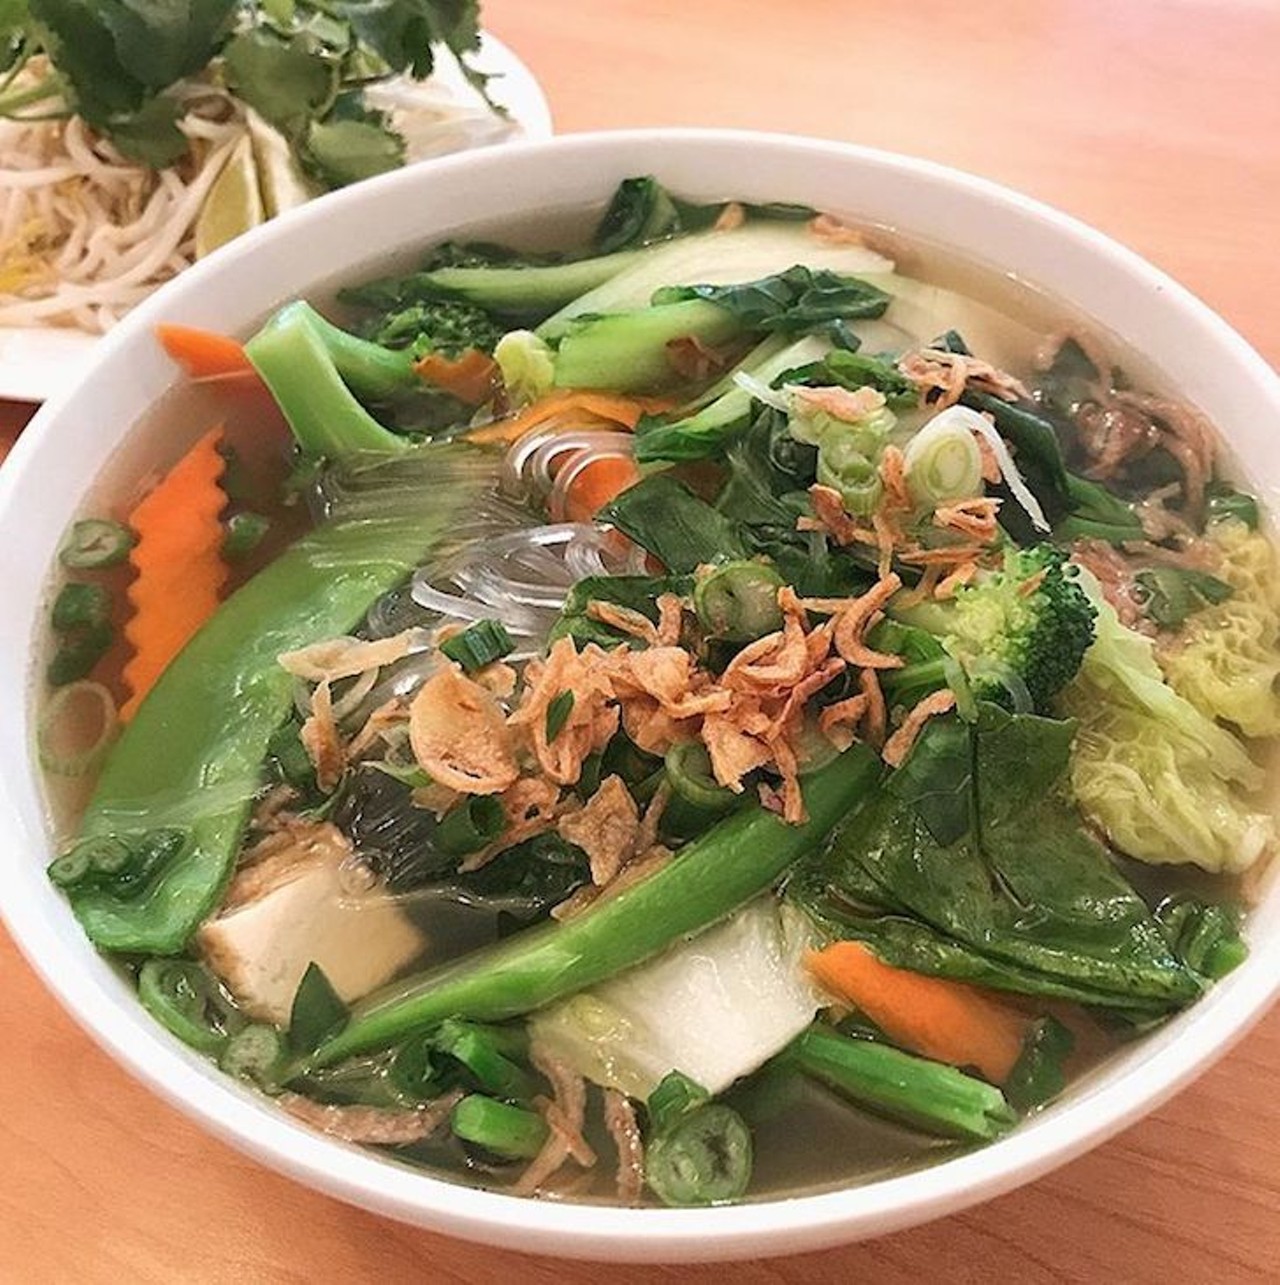 Saigon Noodle and Grill
101 N Bumby Ave., (407) 532-7373
Family-owned and operated, the specialties of the house are Vietnamese rice platters, pan-fried noodle dishes and family-style entrees, plus some of the best pho broth in town.
Photo via saigonnoodleandgrill/Instagram